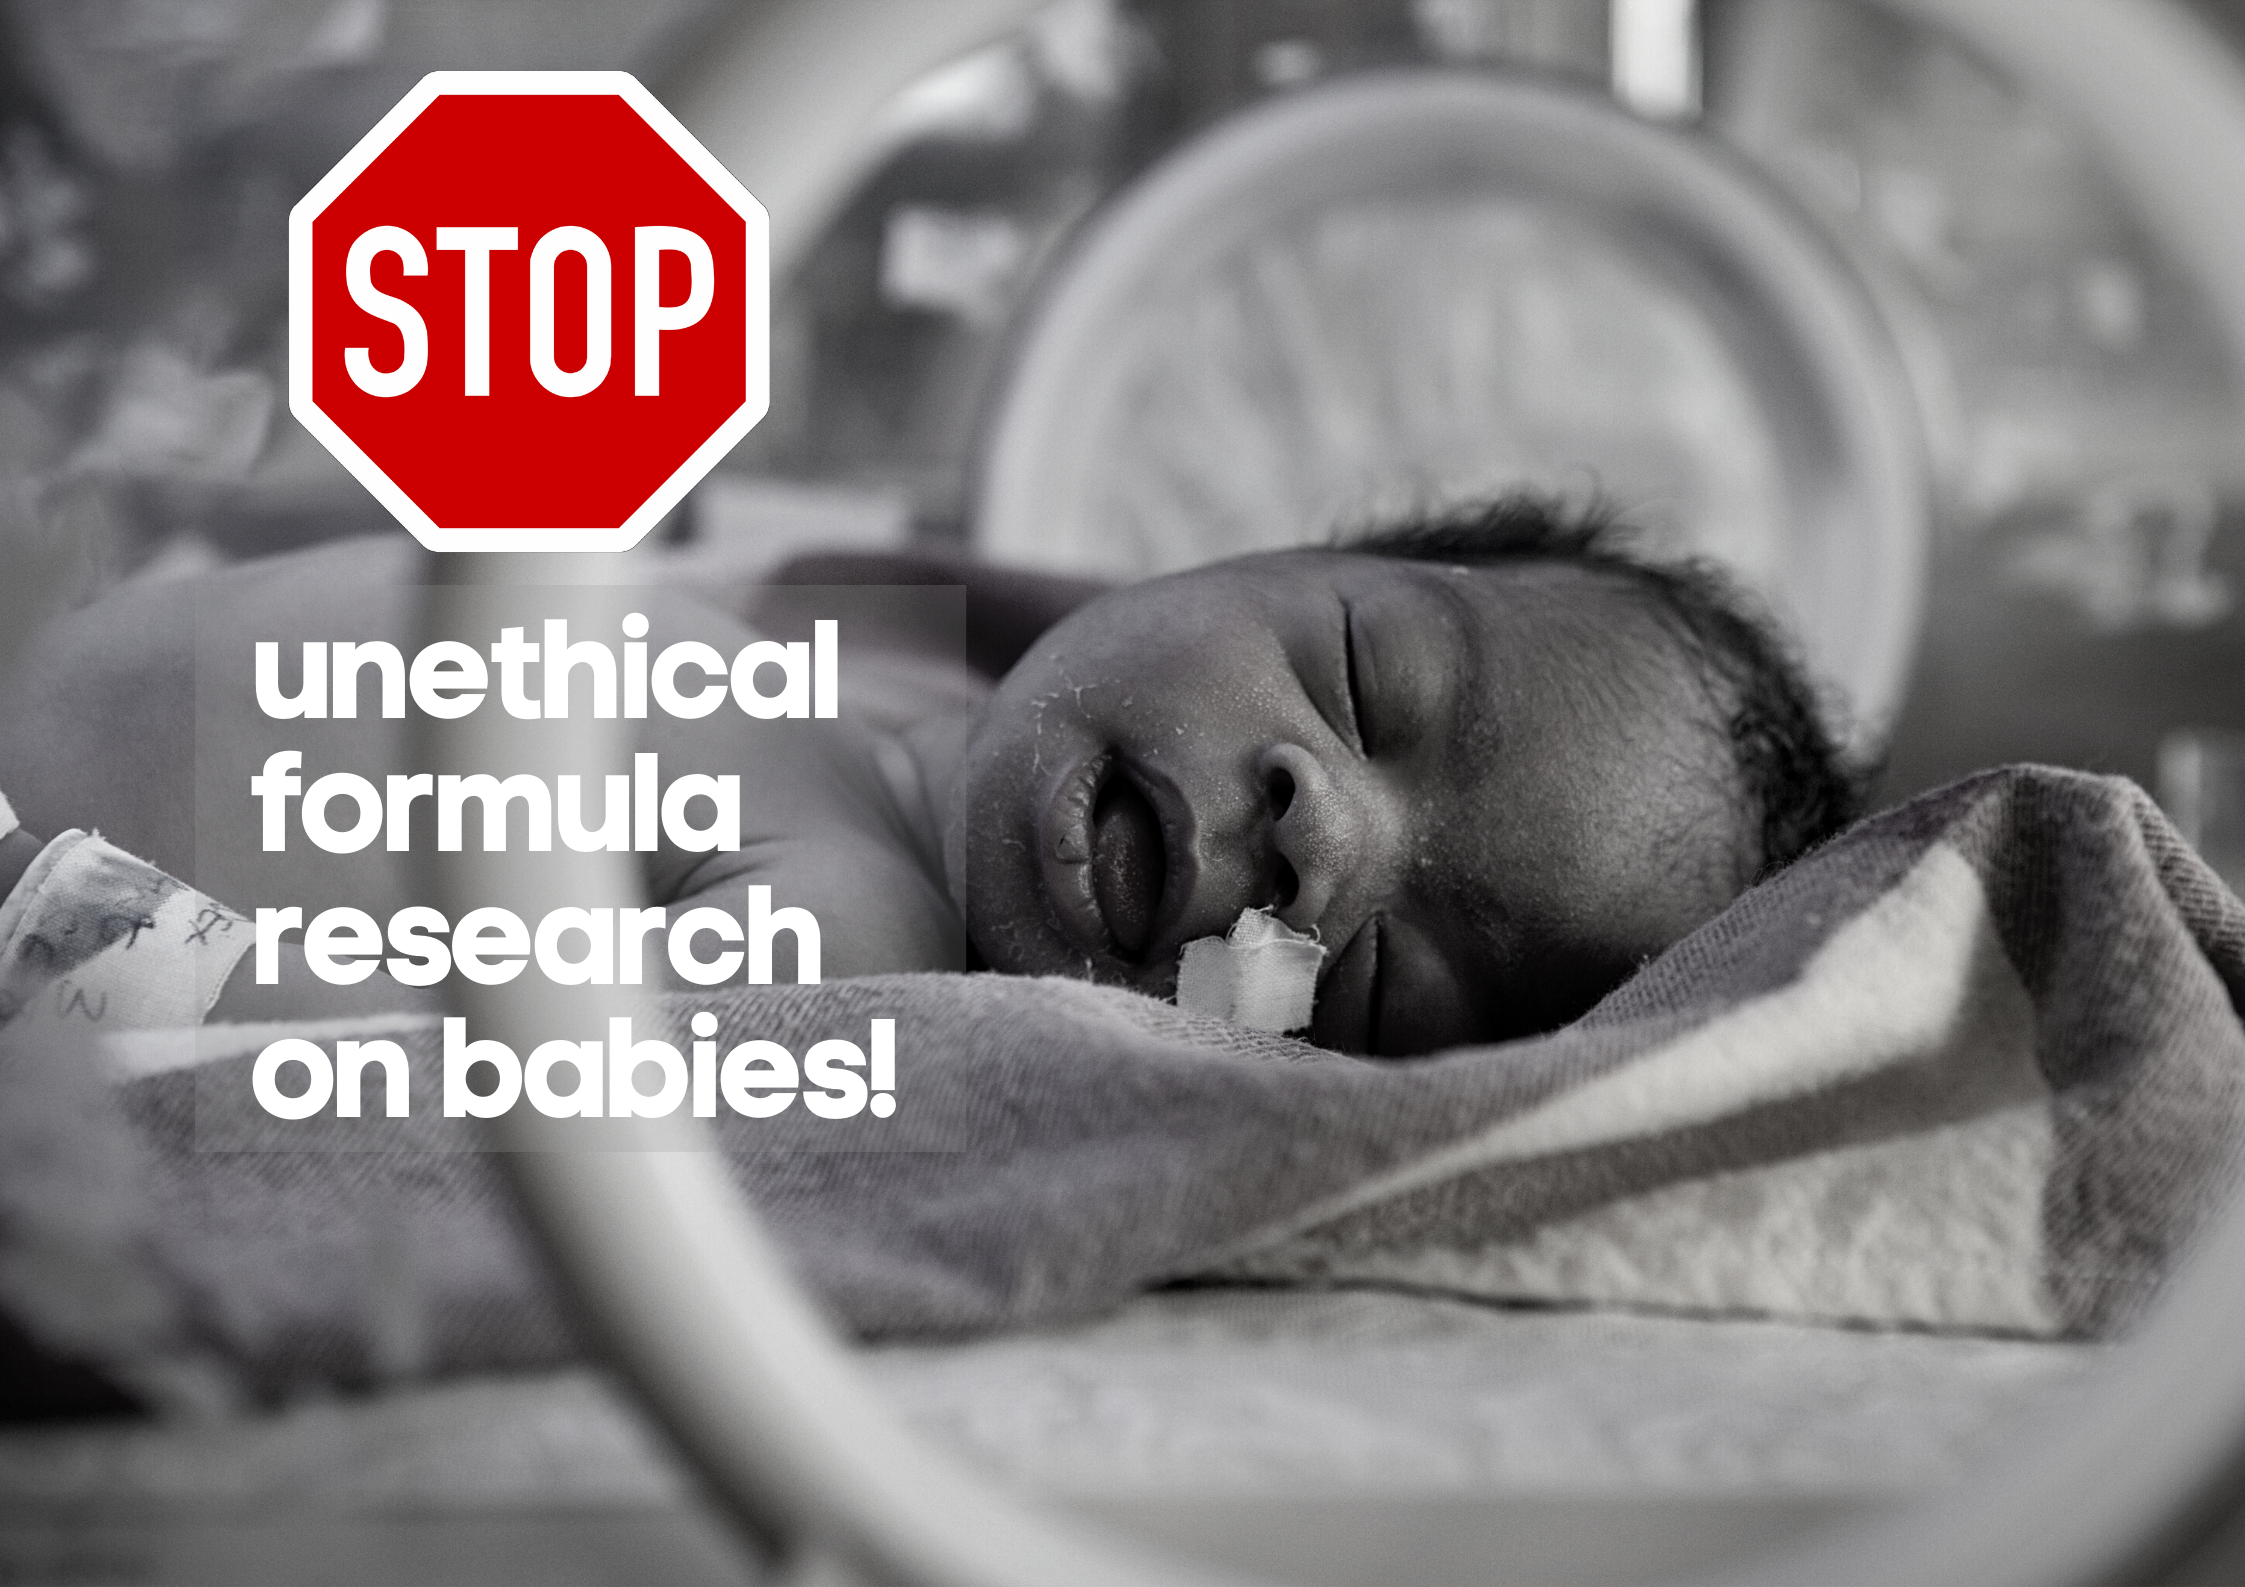 39,000 call for unethical research on babies to stop